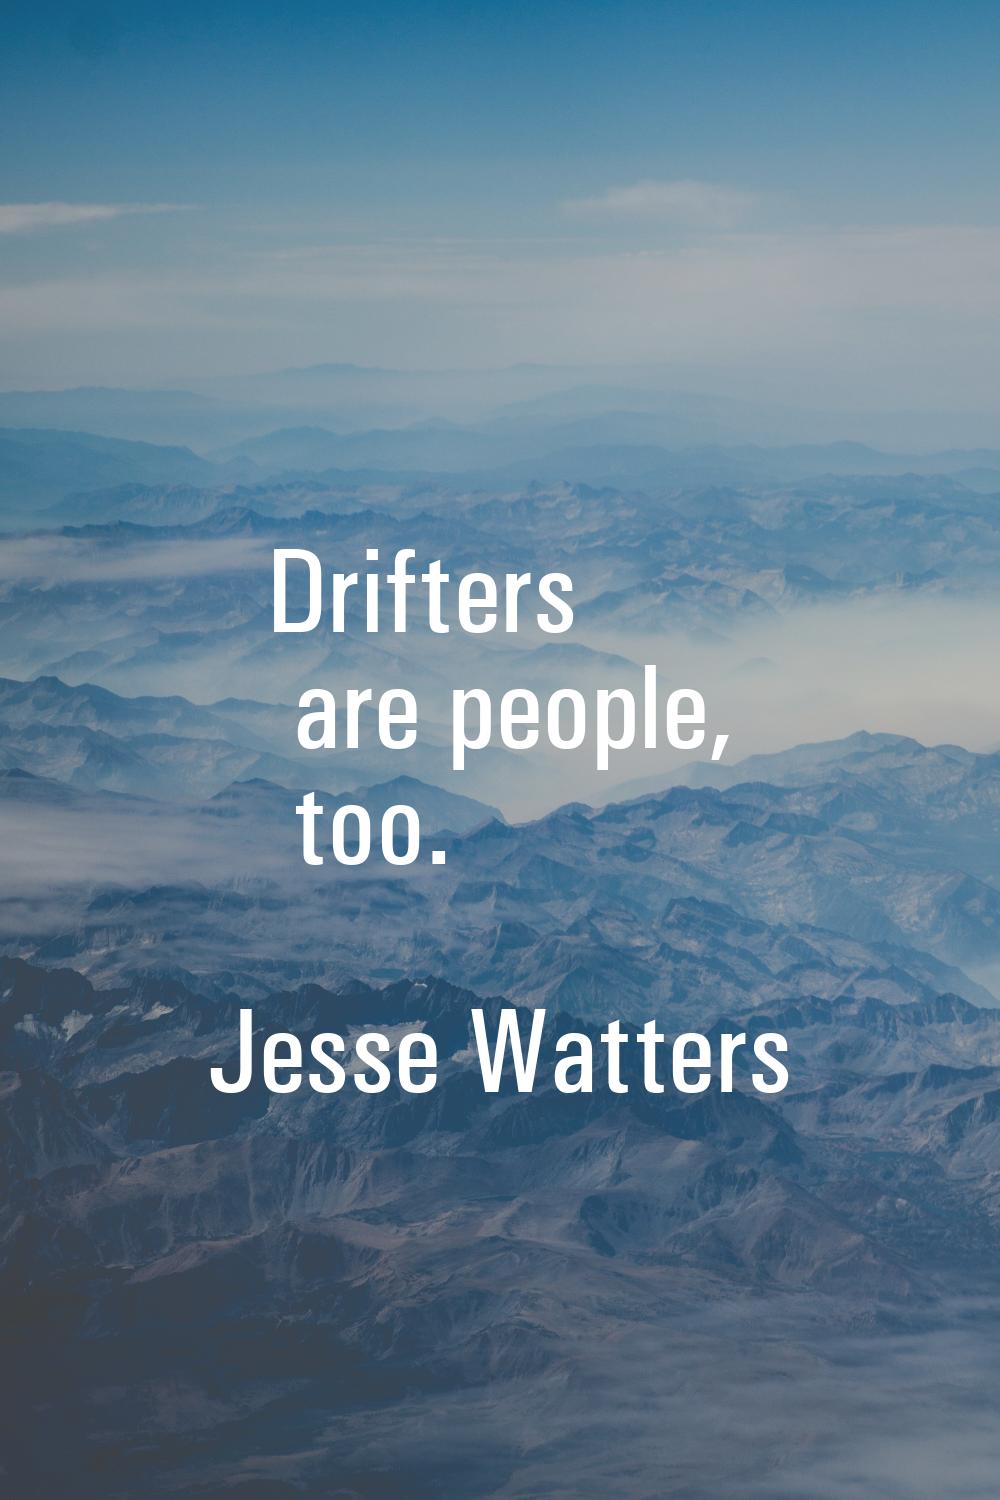 Drifters are people, too.